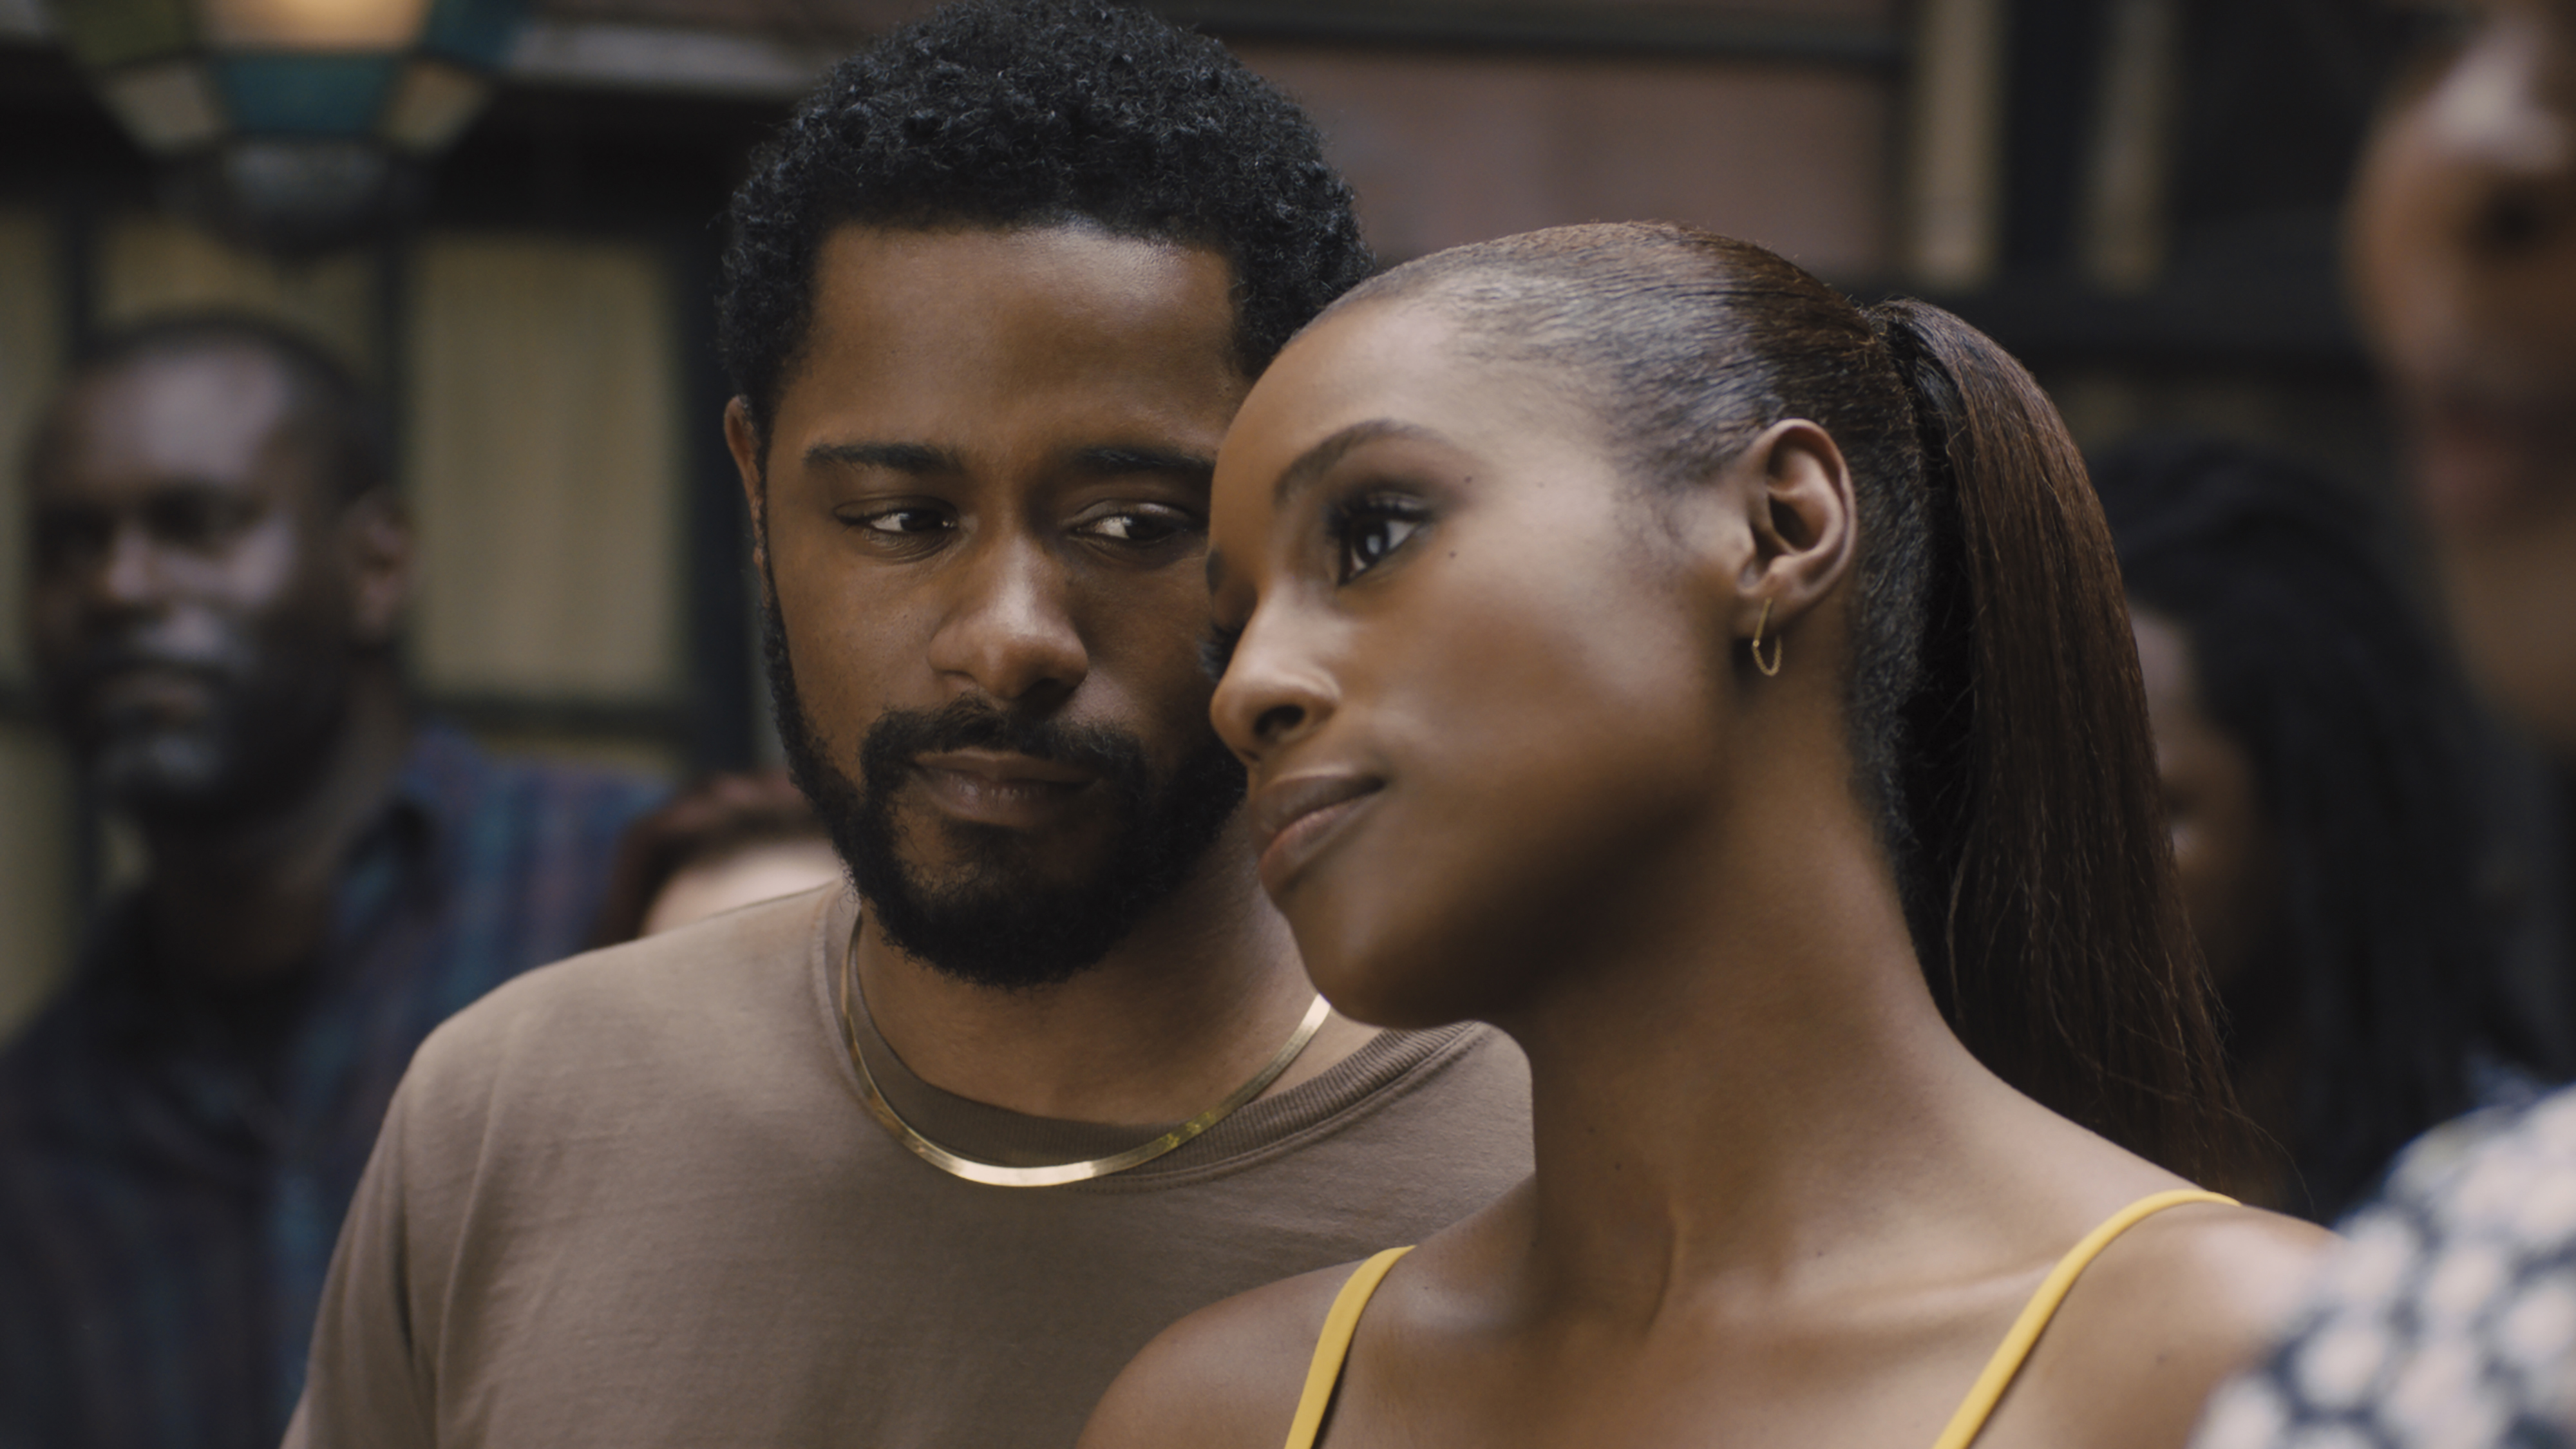 LaKeith Stanfield talks romance, representation in “The Photograph”